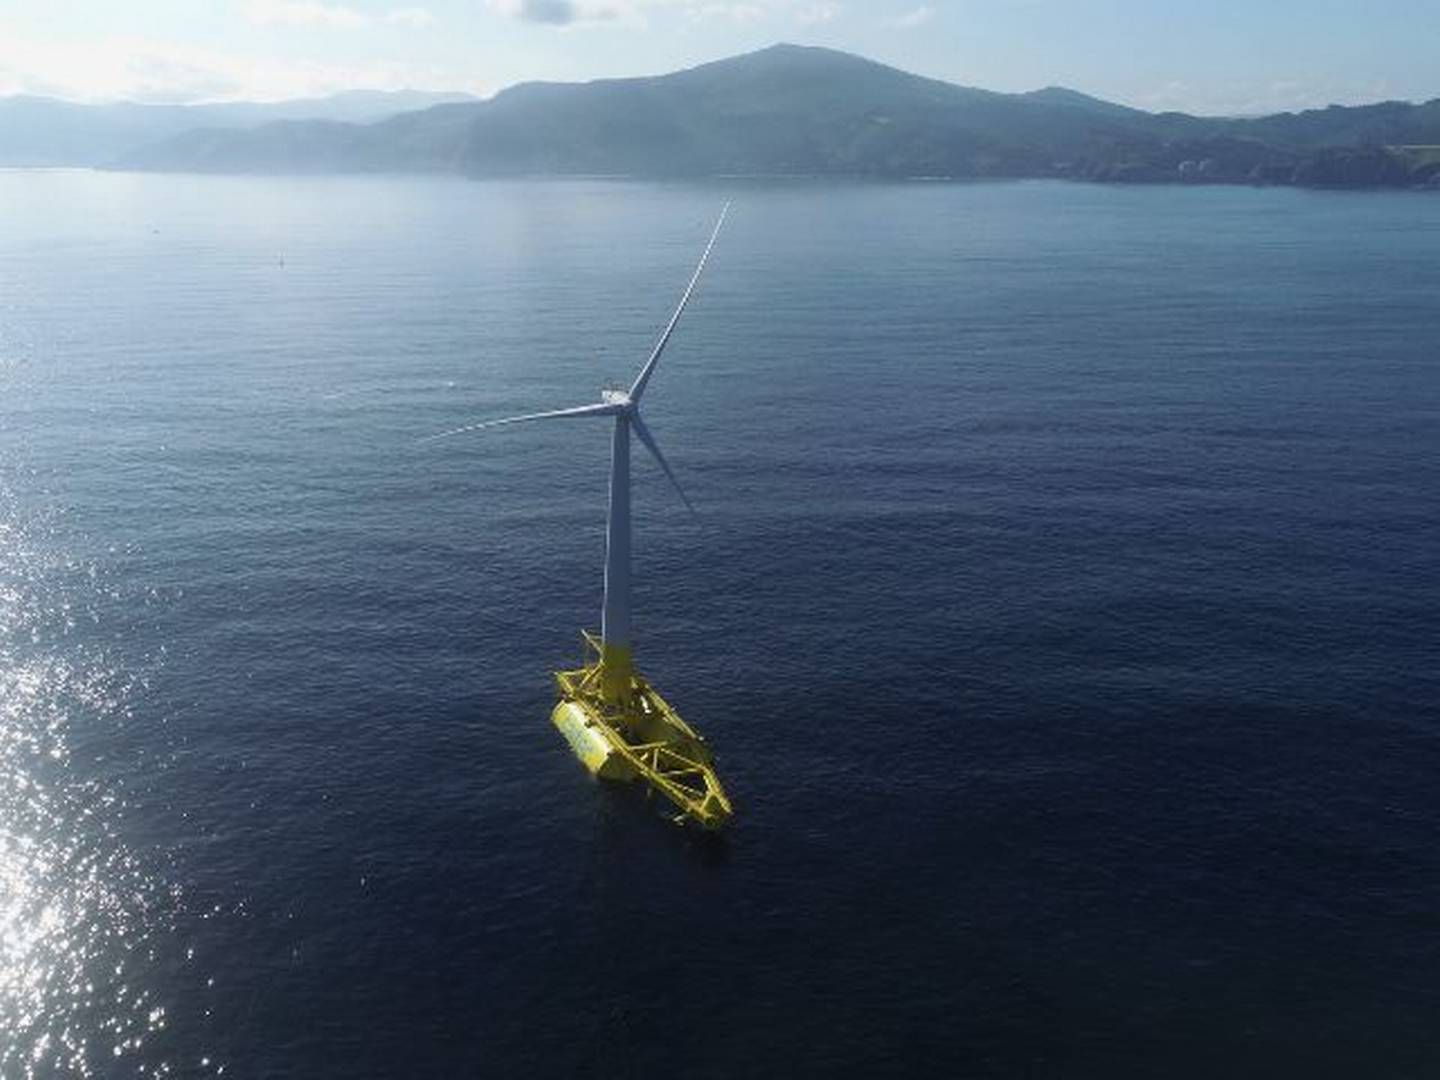 The project consists of a 2 MW wind turbine to be located 2 miles off the Basque coast. | Foto: Pr Saitec